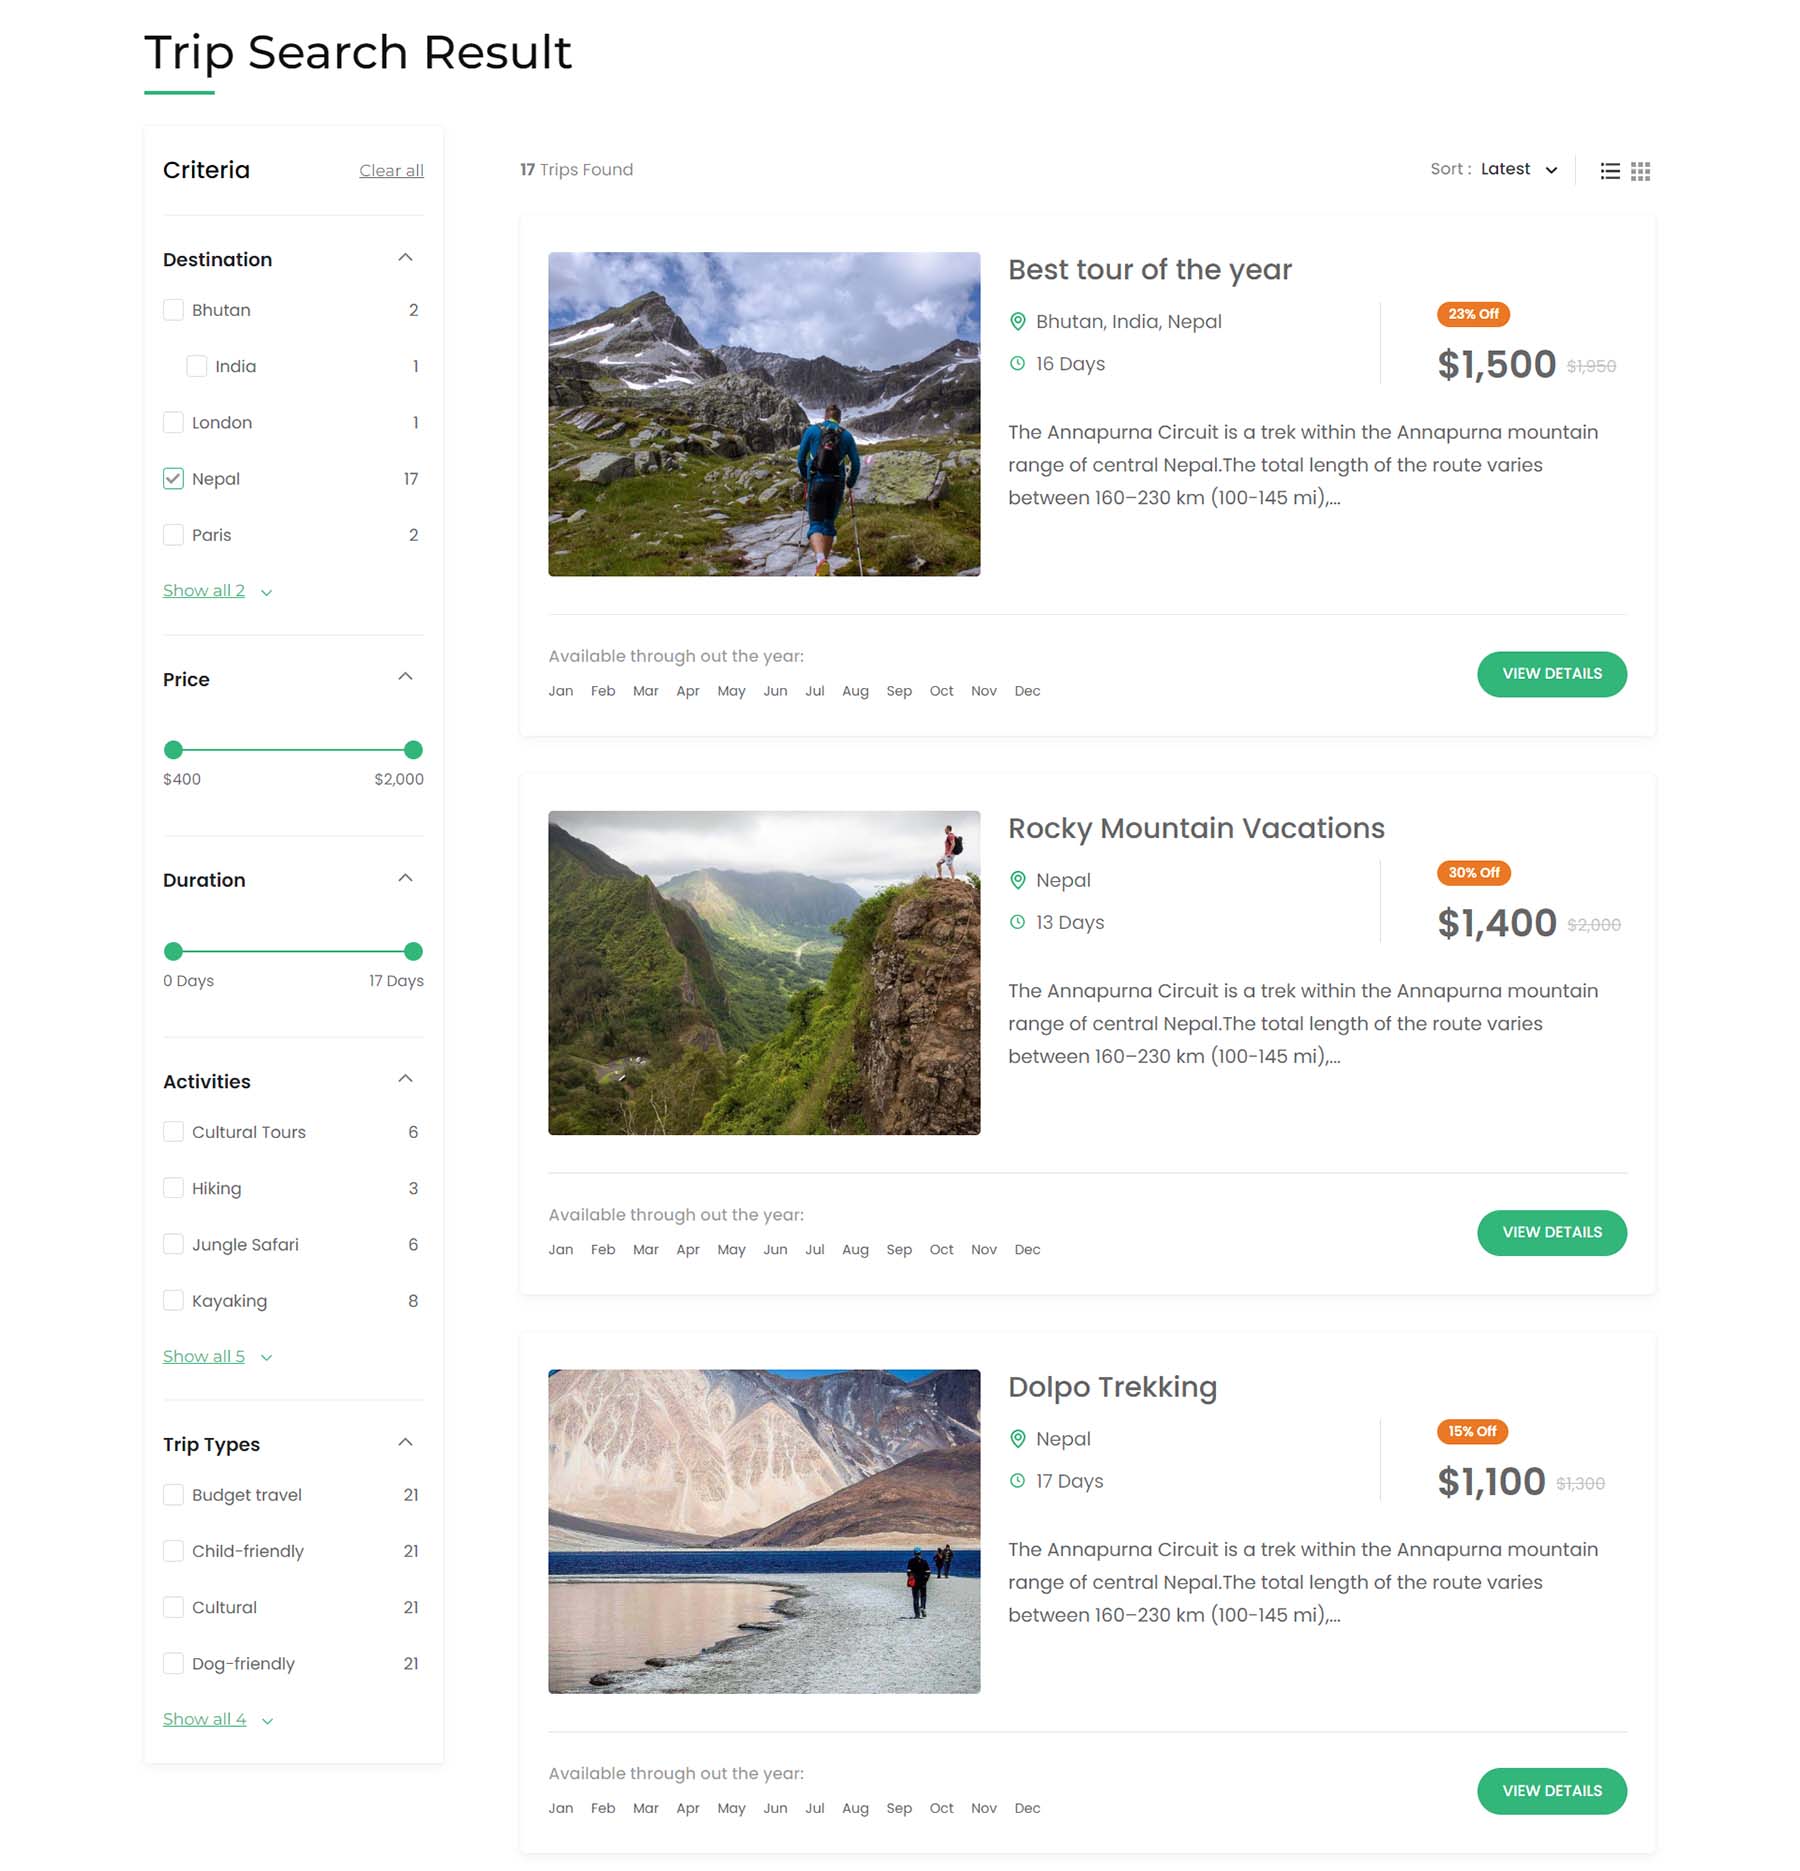 Travel Agency trip search results